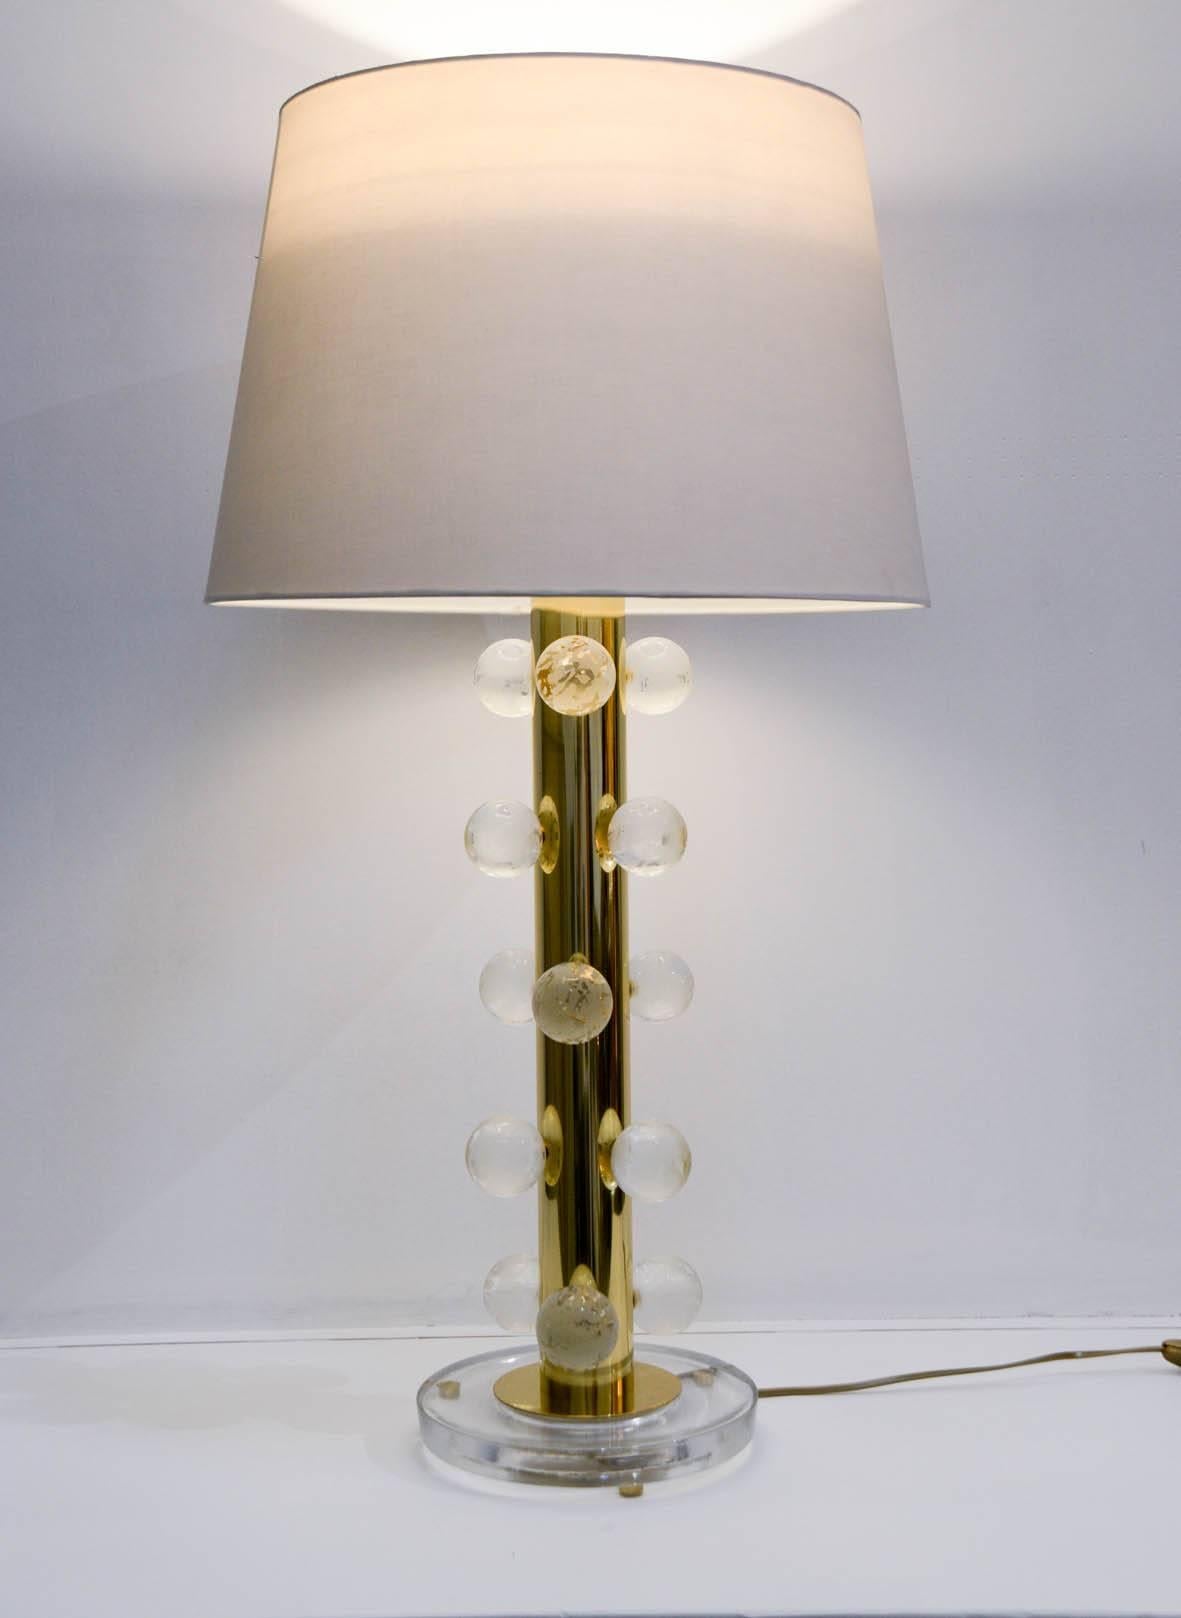 Pair of Murano glass lamps
Can be realized in all colors
Dimensions given without shade
No shade provided.